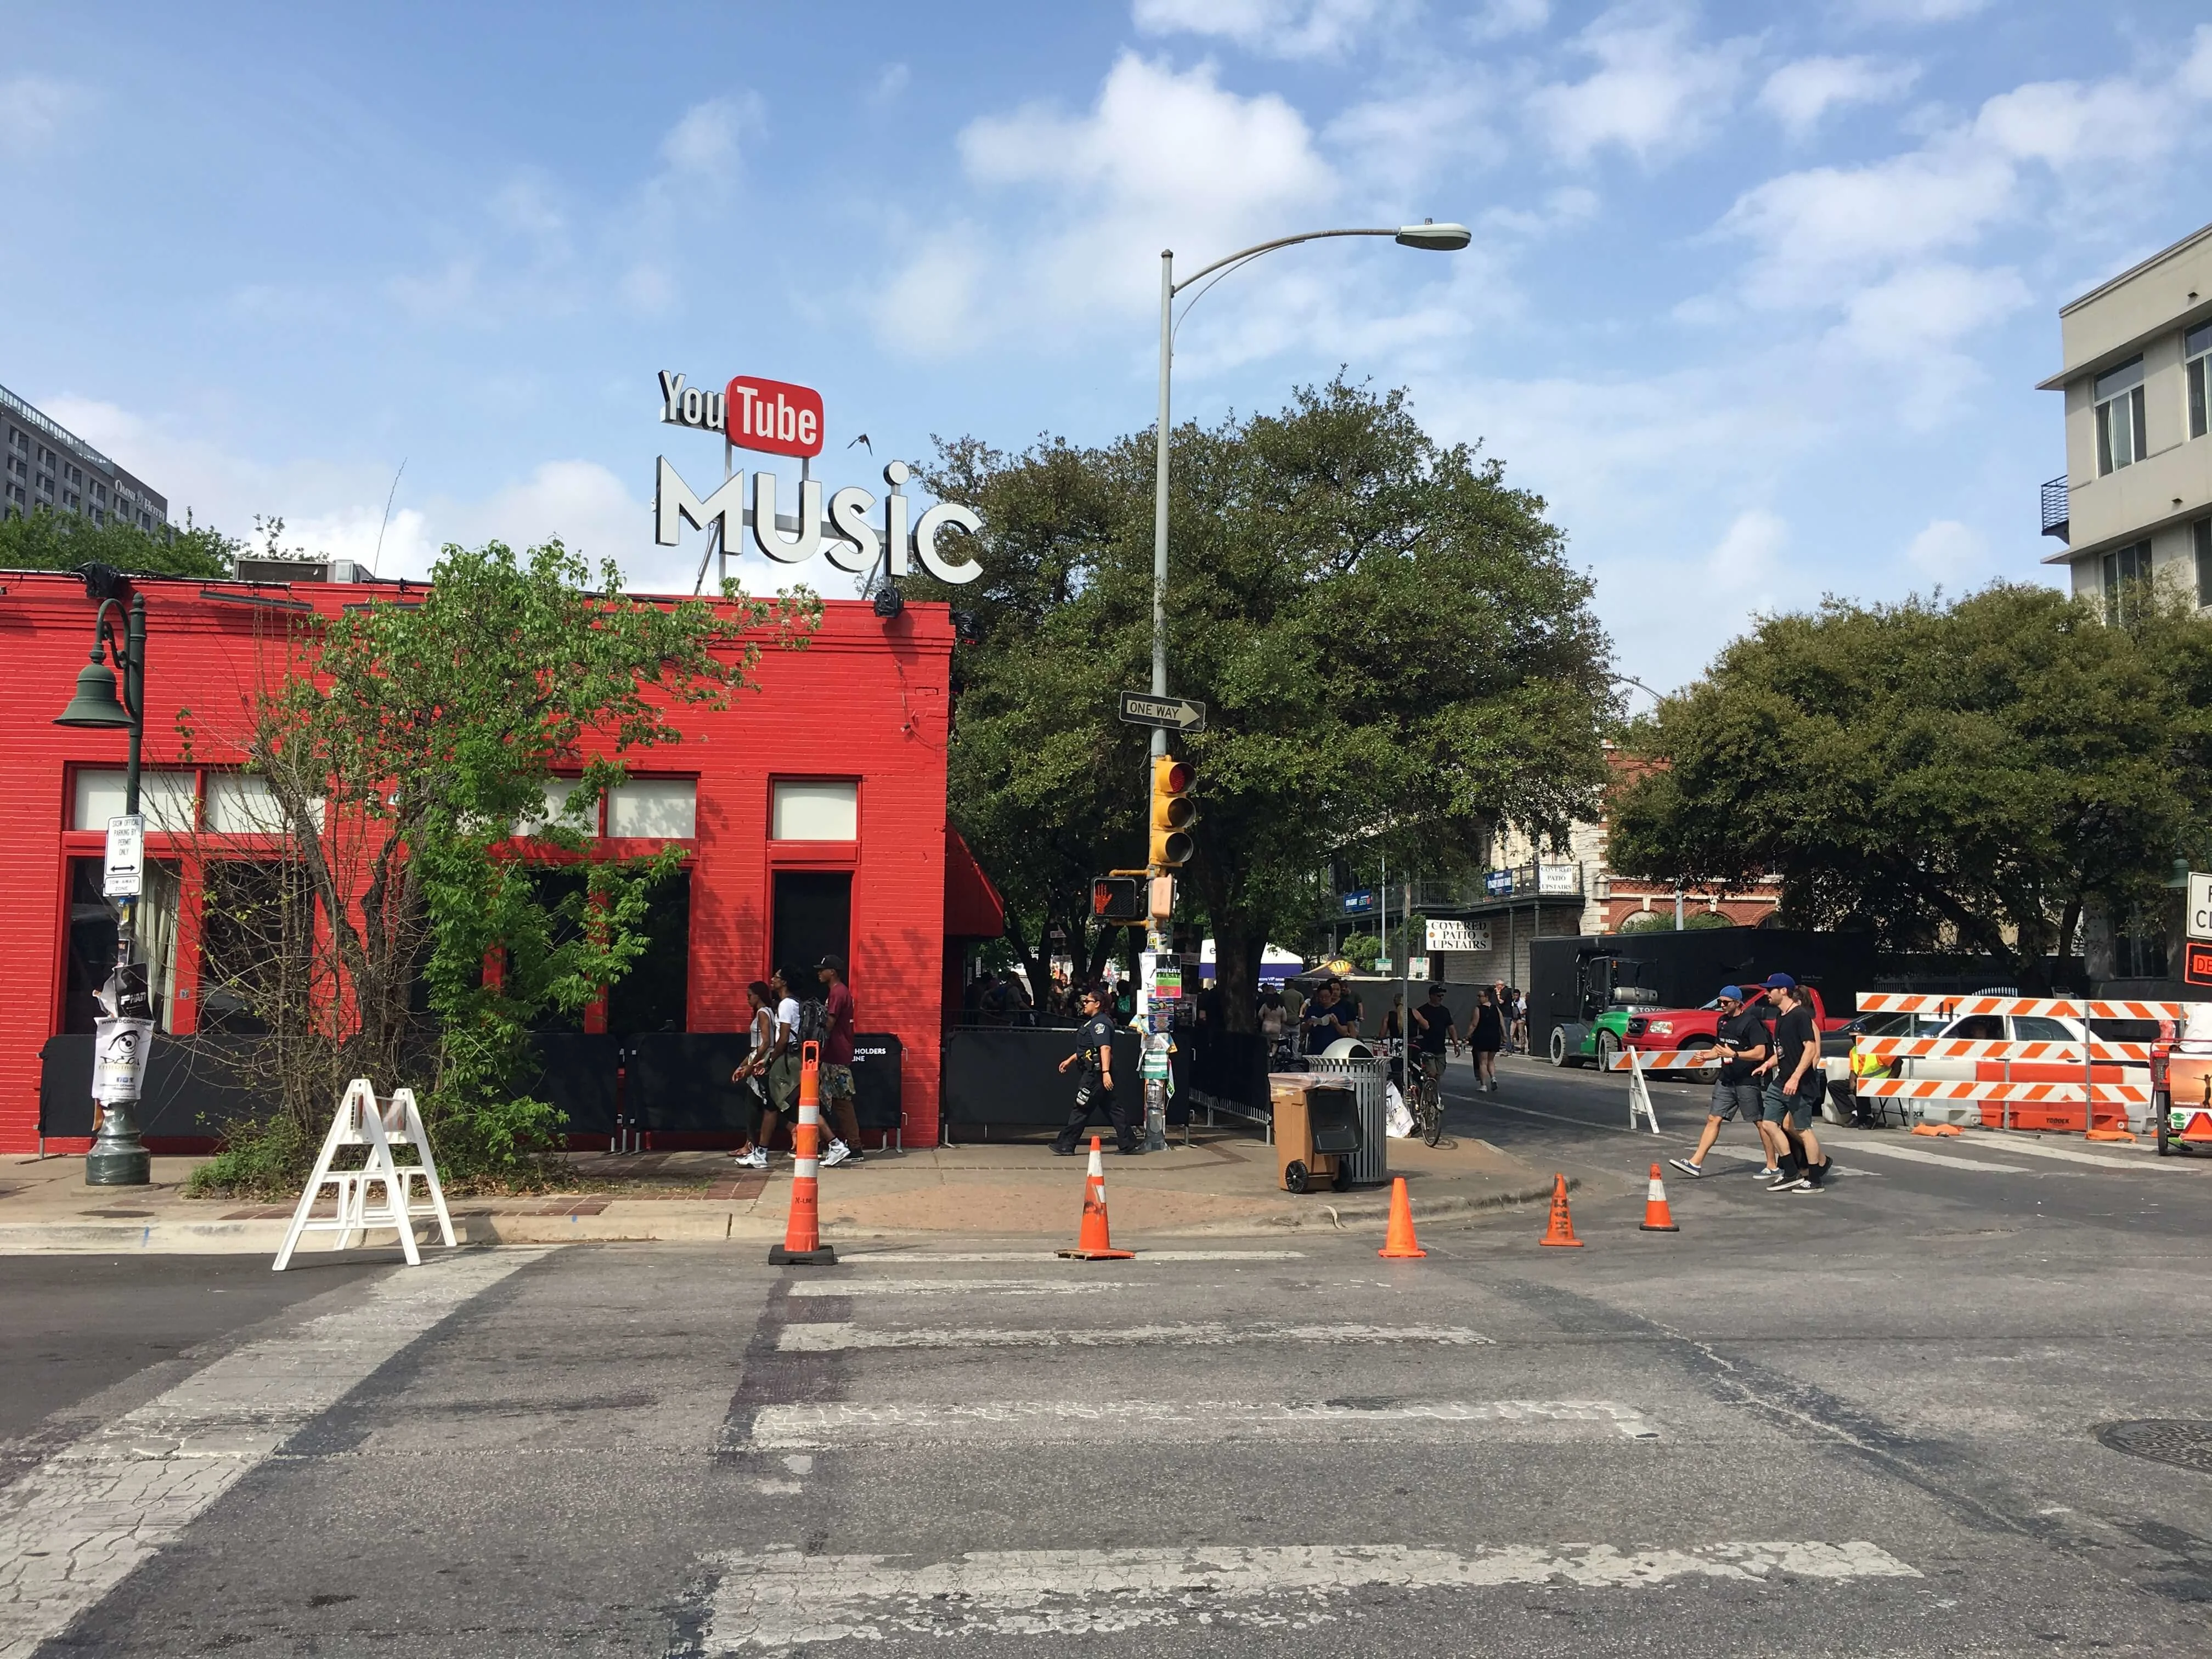 What to Expect from SXSW